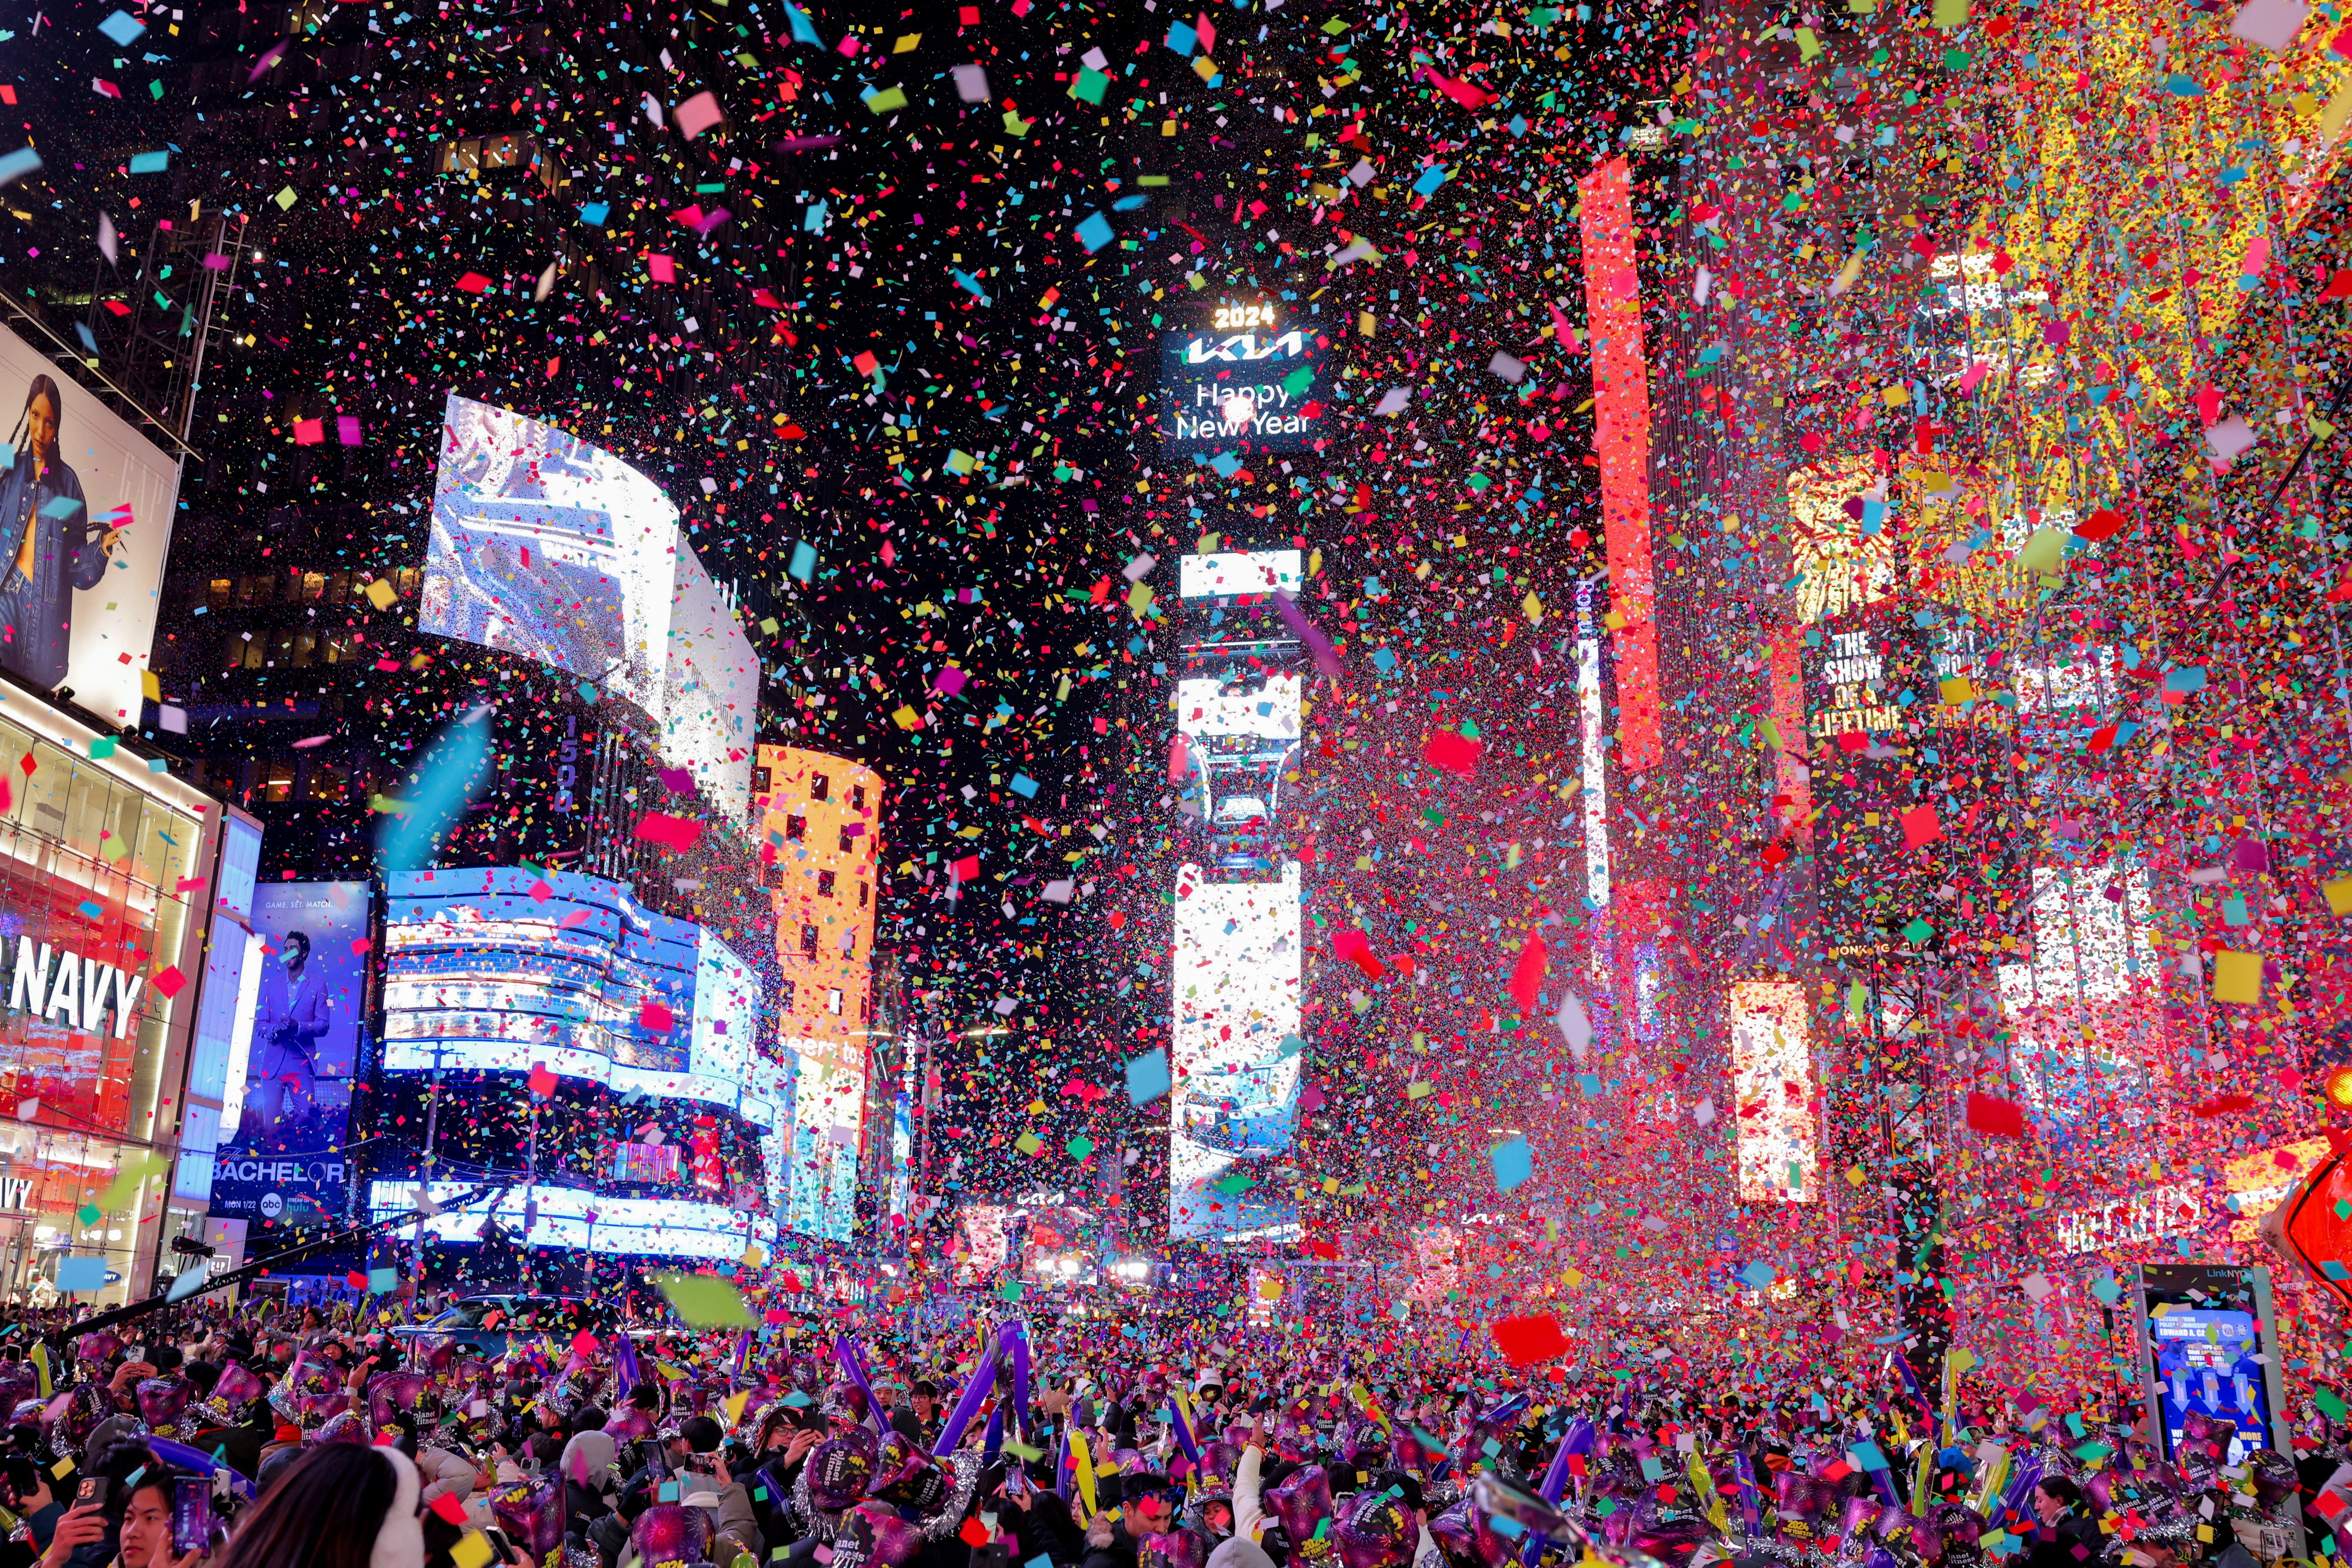 People watch confetti flying around after the clock strikes midnight during New Year celebrations at Times Square, in New York City, New York, US